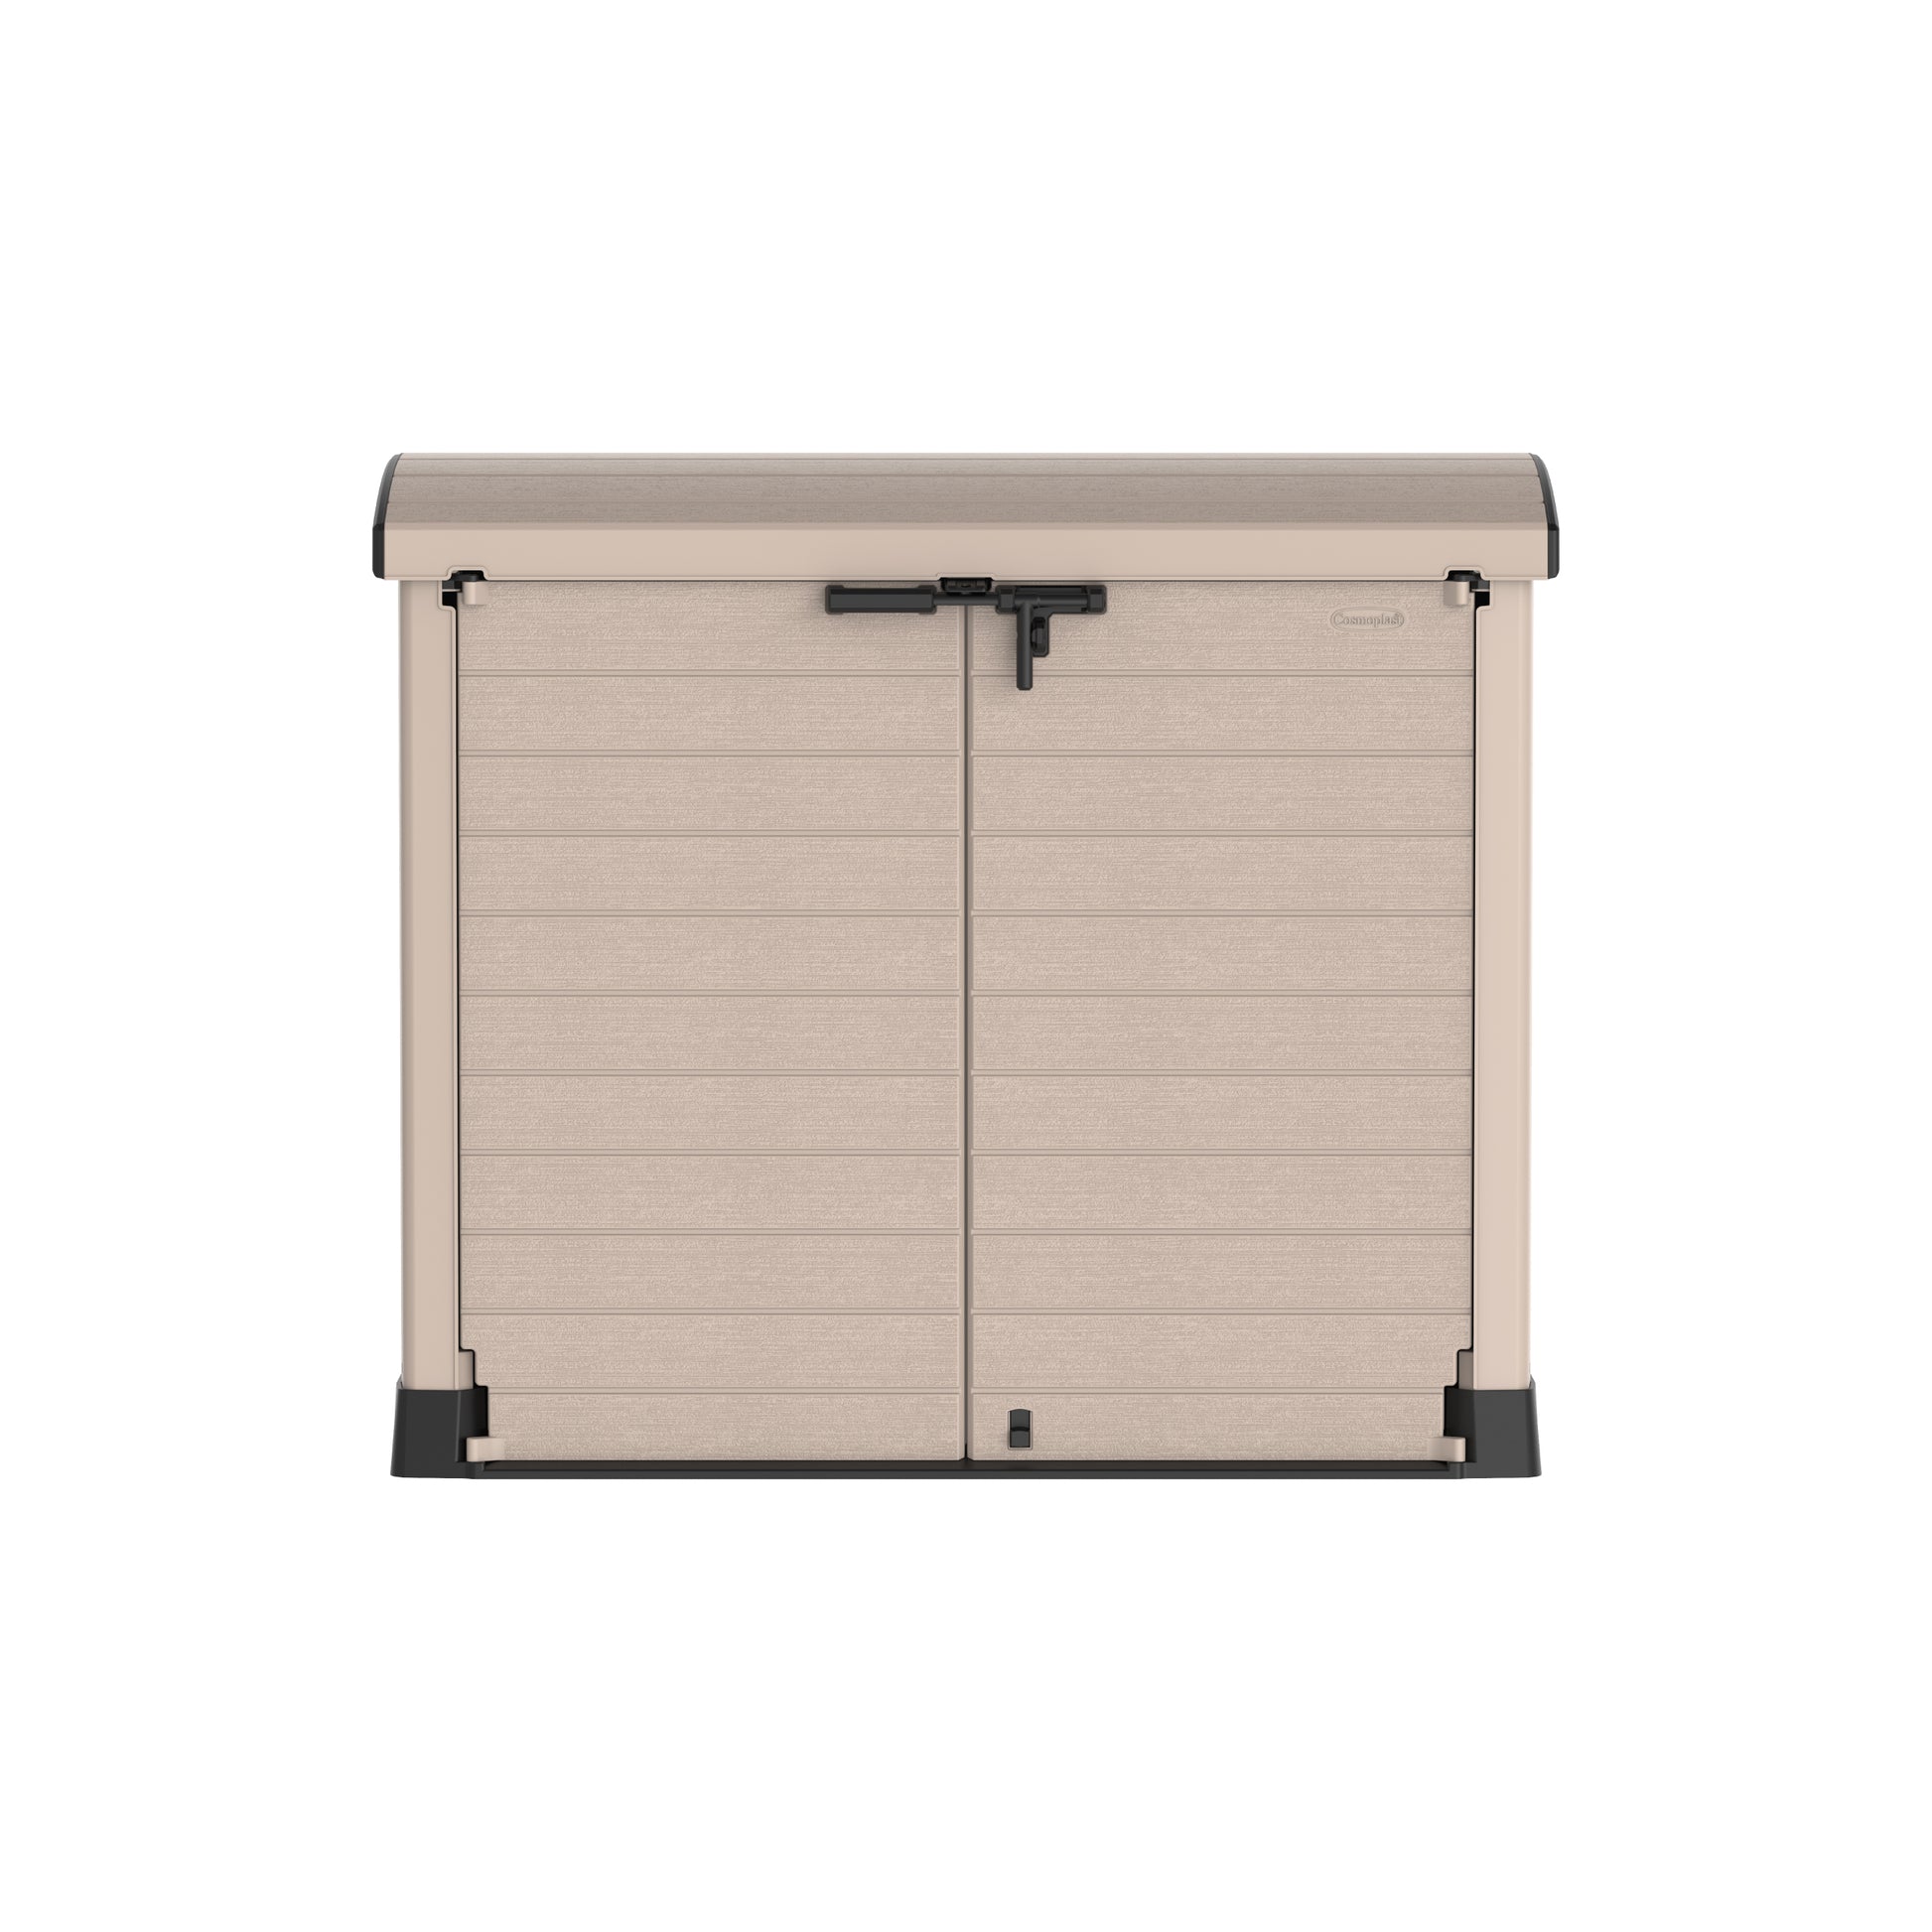 waste bin 1200L Small Storage Shed with Arc Lid- Cosmoplast